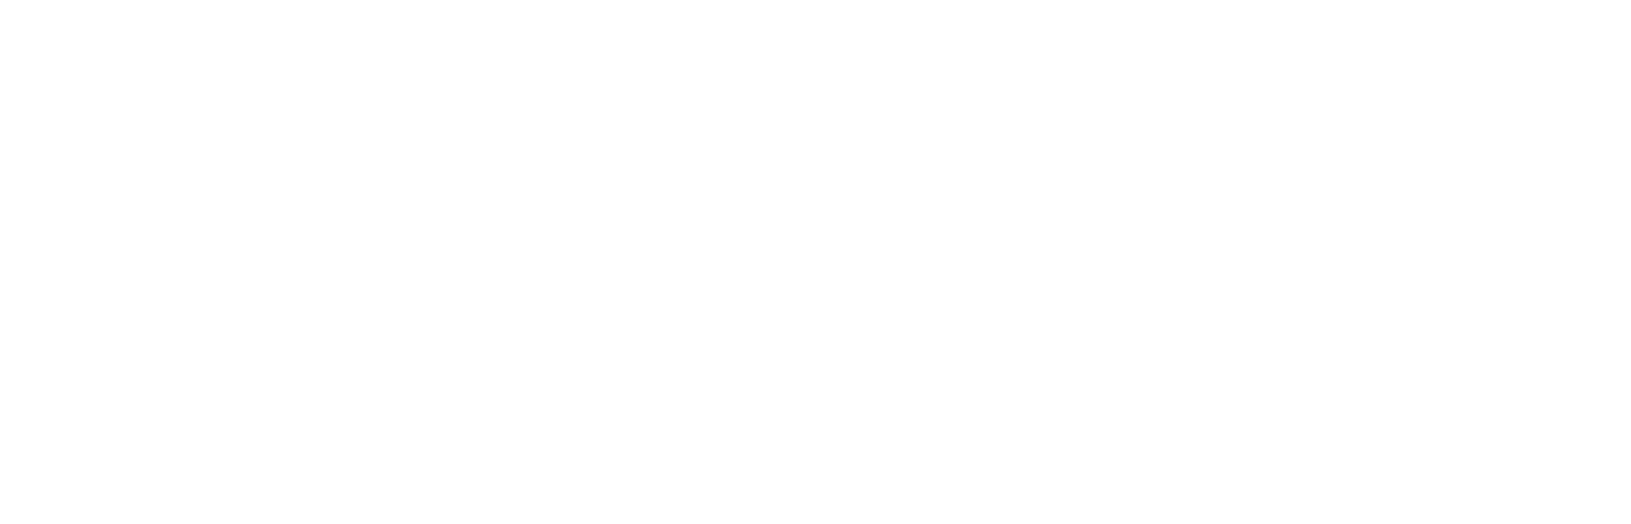 ff-hohenwestedt